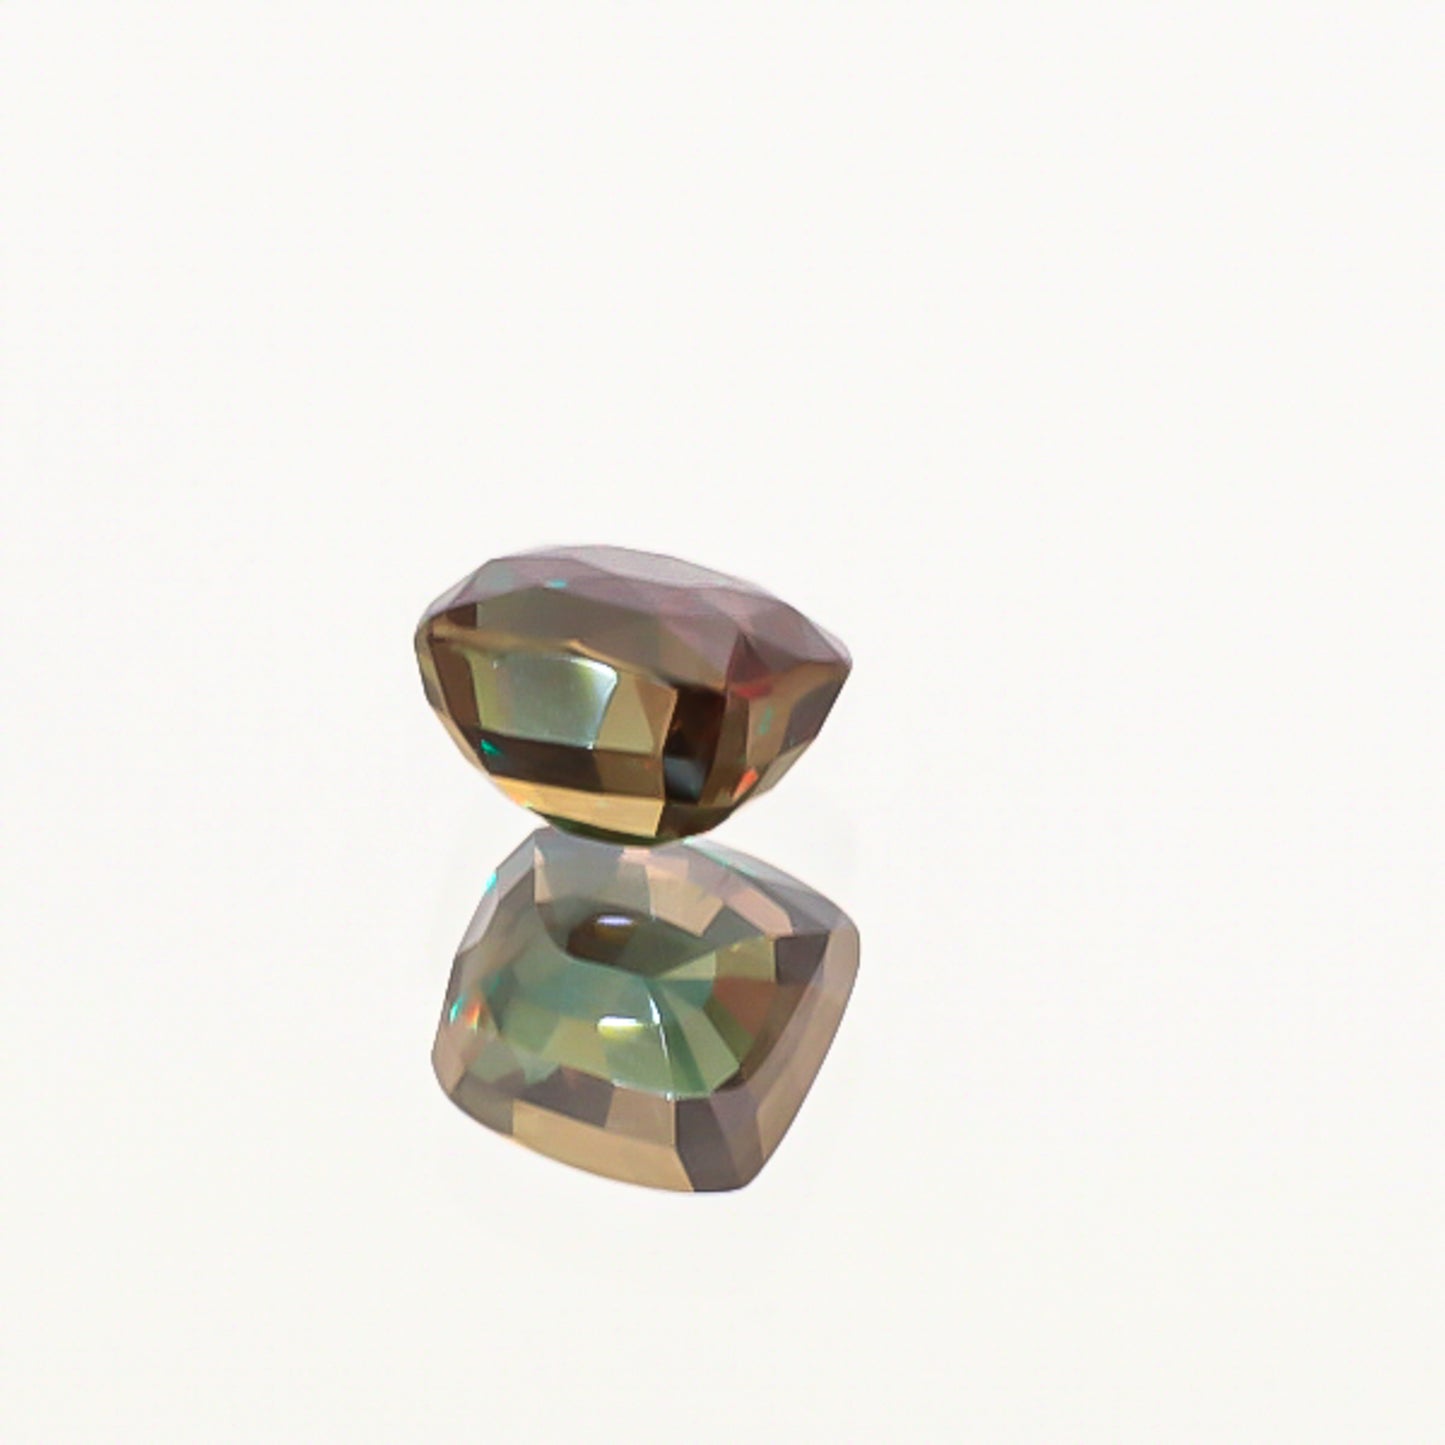 Natural Alexandrite Blue-Green Changing to Reddish Purple Color 3.98 Carats With GIA Report